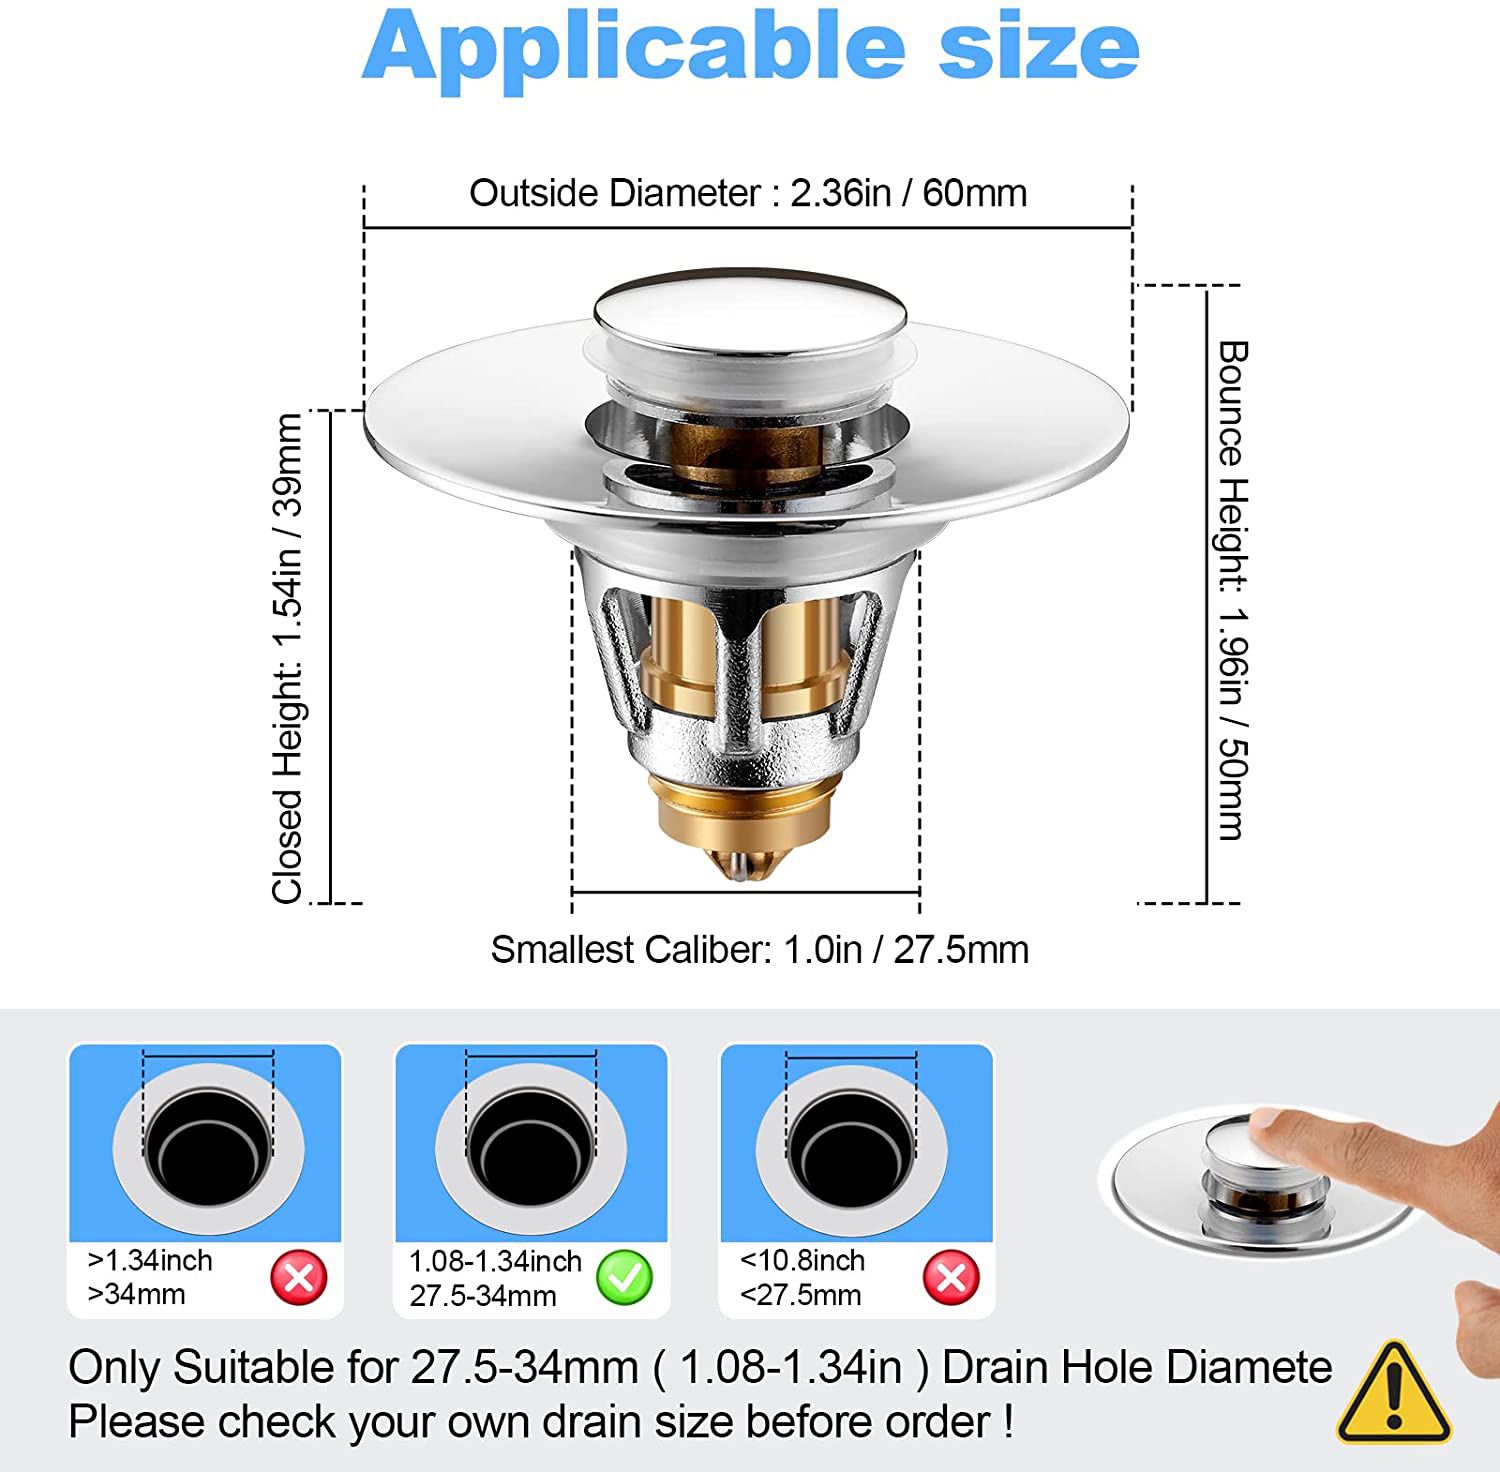 Bathroom Sink Stopper, Pop-Up Drain Filter, for 1.08-1.34 in U.S. Standard Drain Holes, Anti Clogging Sink Strainer with Basket, Bounce Bullet Core Ty